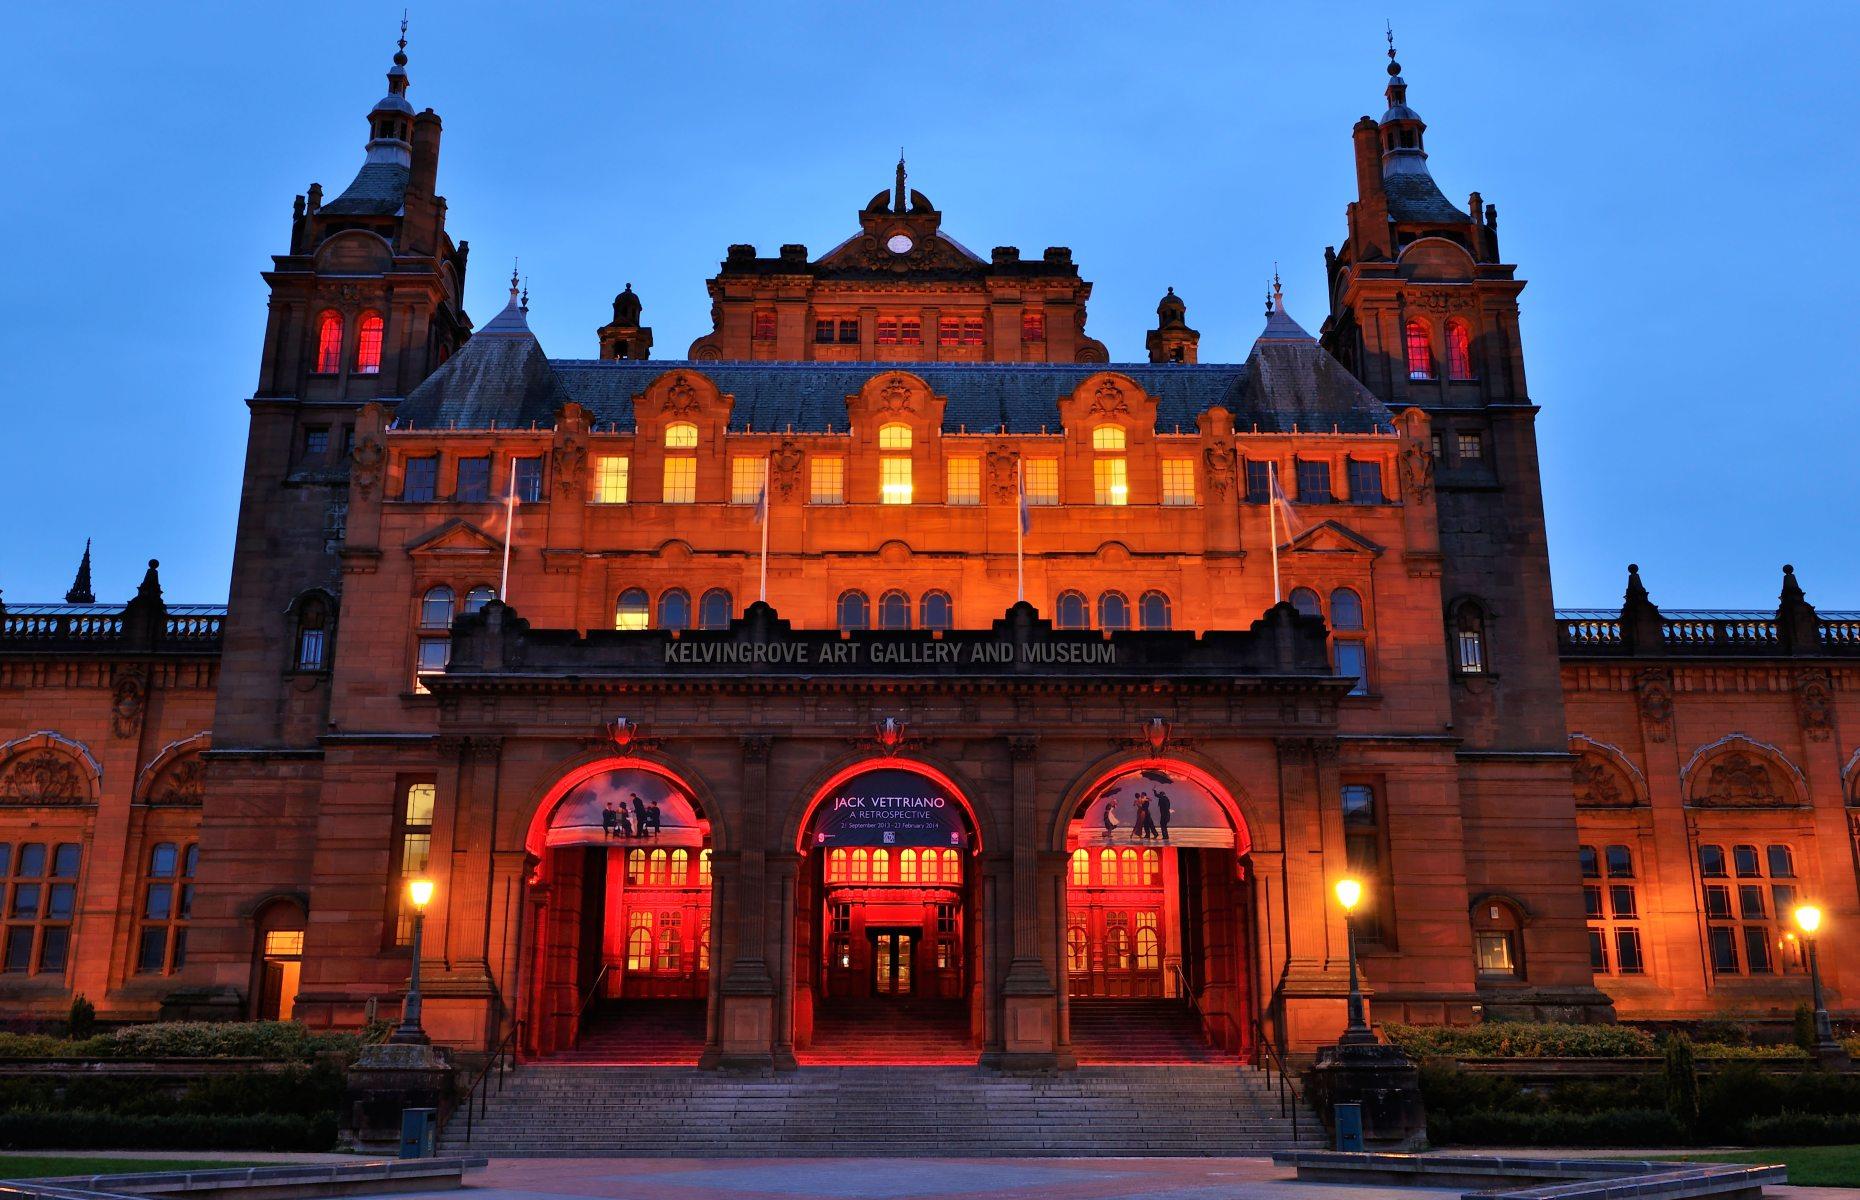 <p>First opened in 1901, Glasgow’s <a href="http://www.glasgowlife.org.uk/museums/venues/kelvingrove-art-gallery-and-museum">Kelvingrove Museum</a> is one of the most-visited free attractions in Scotland. Inside its beautiful Baroque building, the museum is home to one of Europe’s finest art collections. With 22 state-of-the-art galleries and around 8,000 objects, the museum’s highlights include Rembrandt’s <em>Man in Armour</em> alongside works by J. M. W. Turner and Monet.</p>